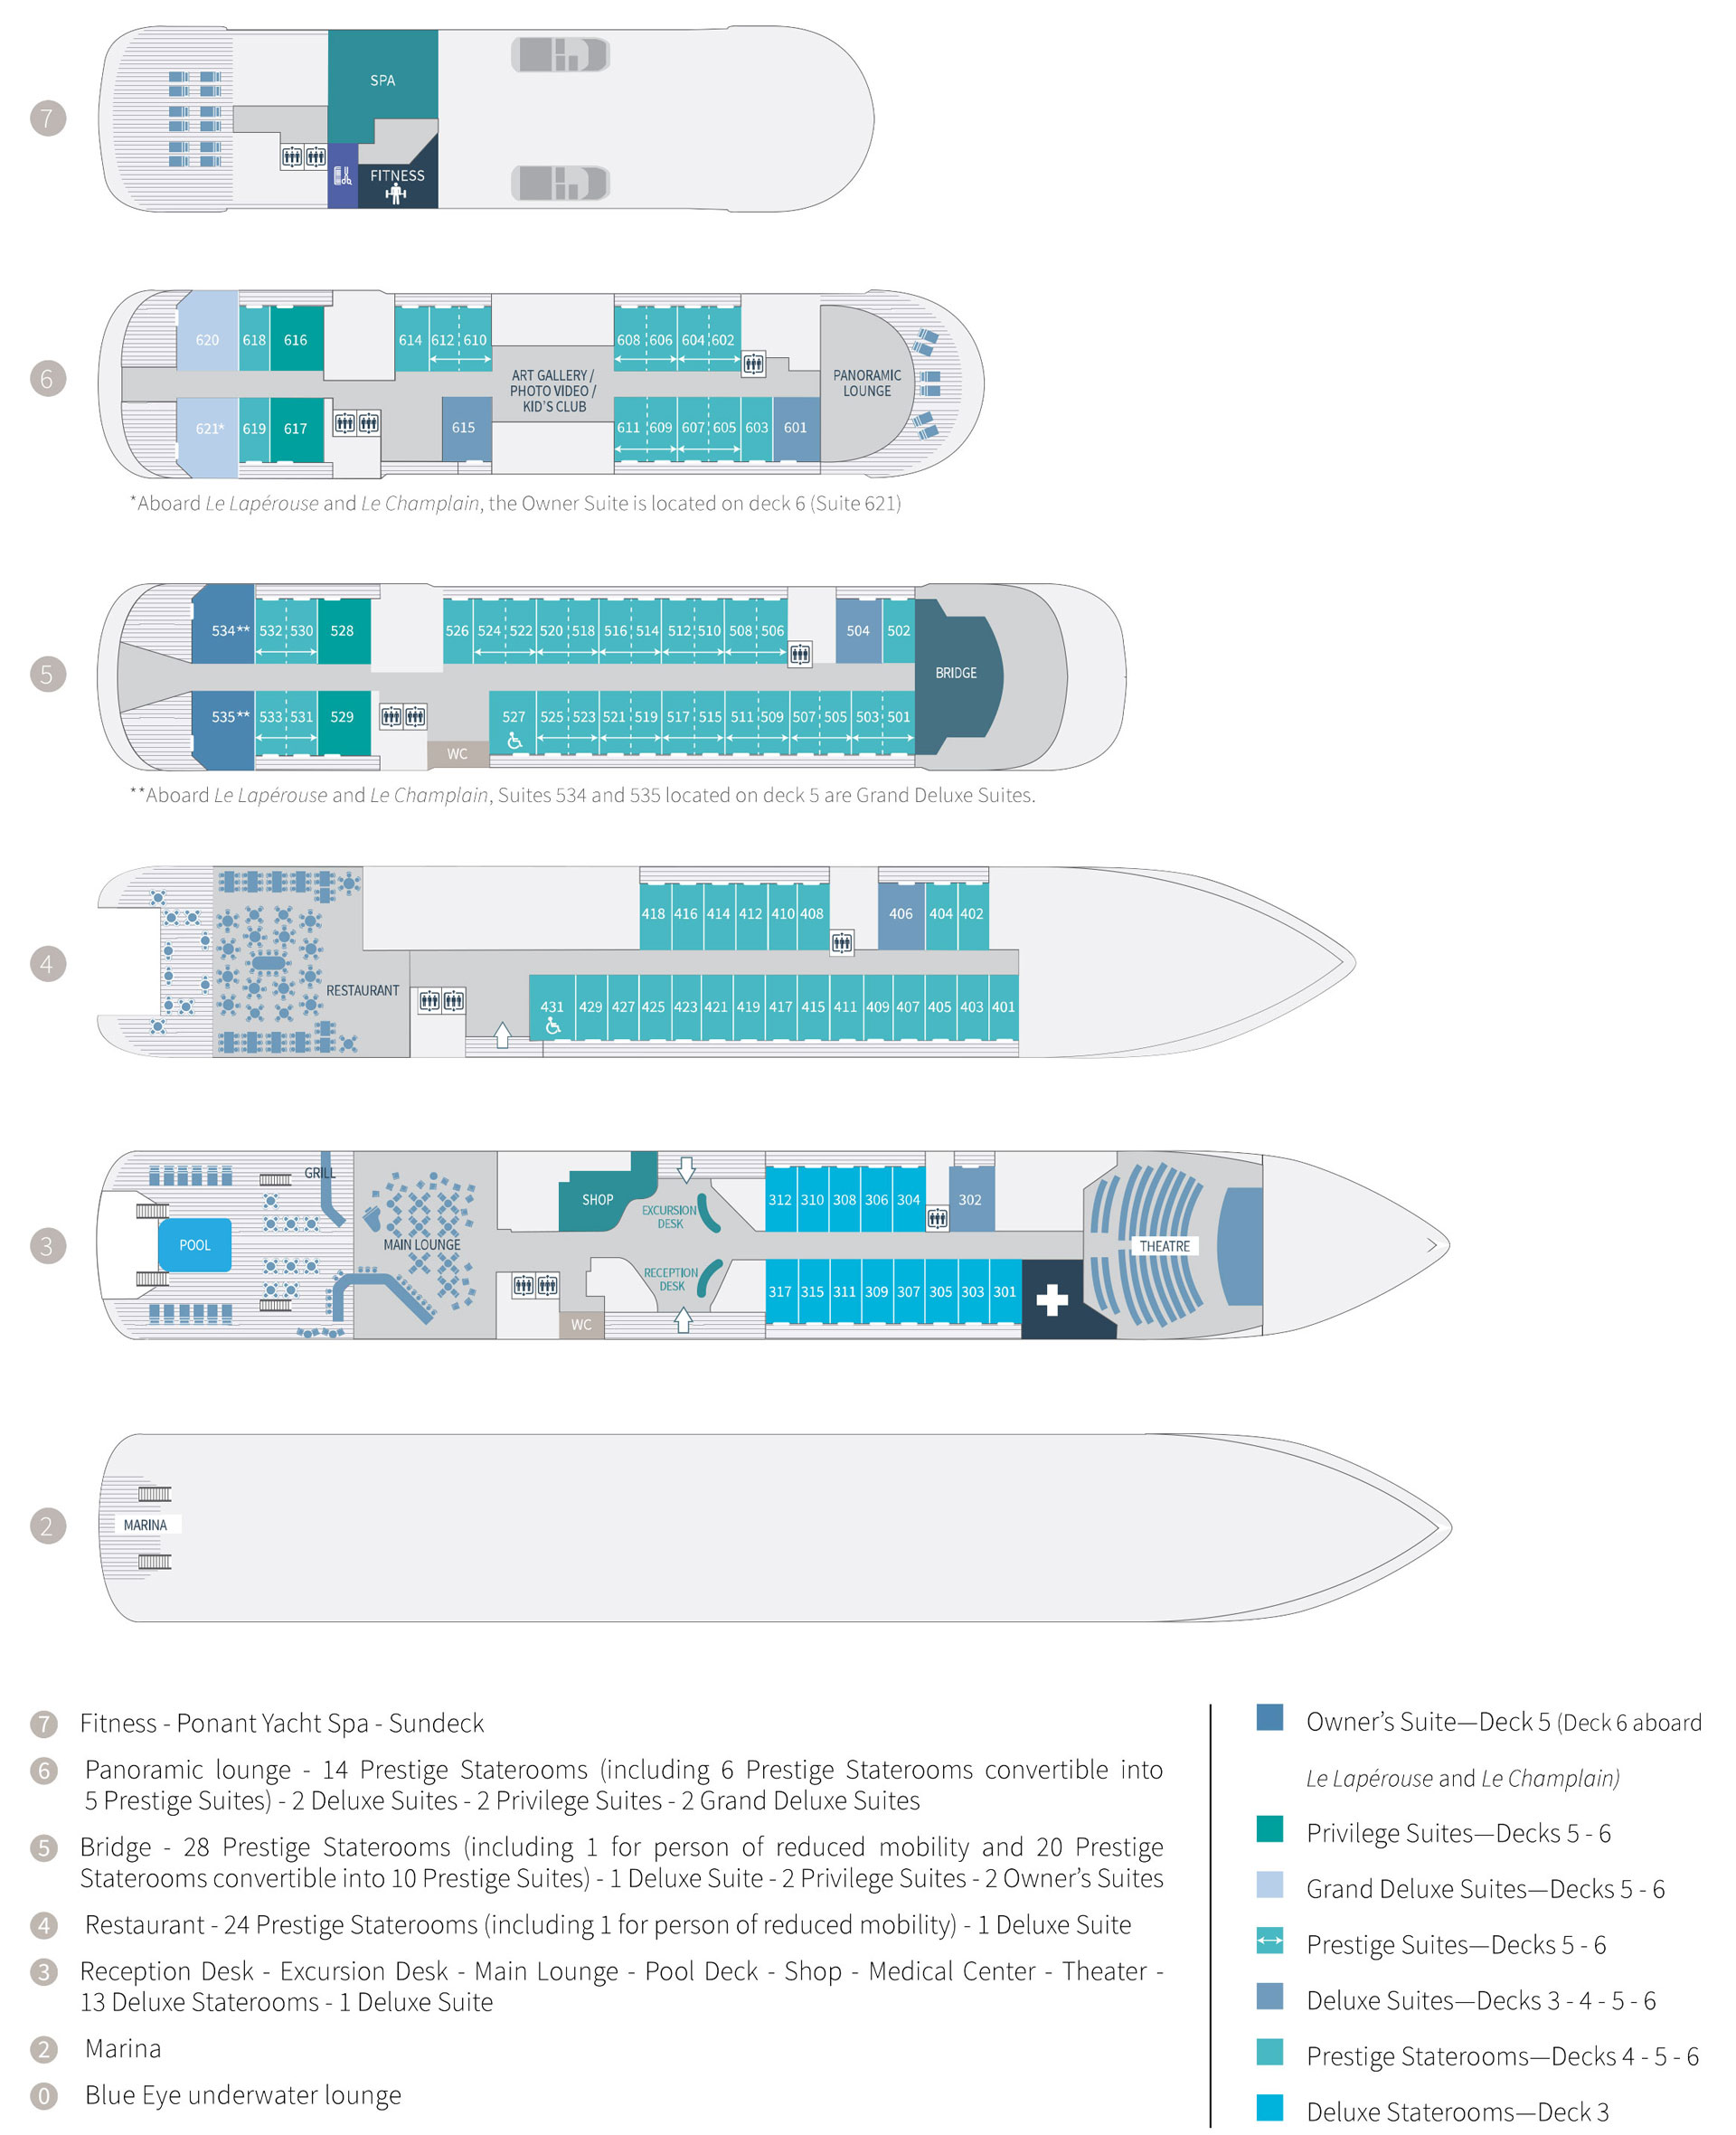 Deck plan of 184-guest Le Jacques Cartier French luxury expedition ship, showing 4 passenger decks with 88 staterooms & 4 suites.